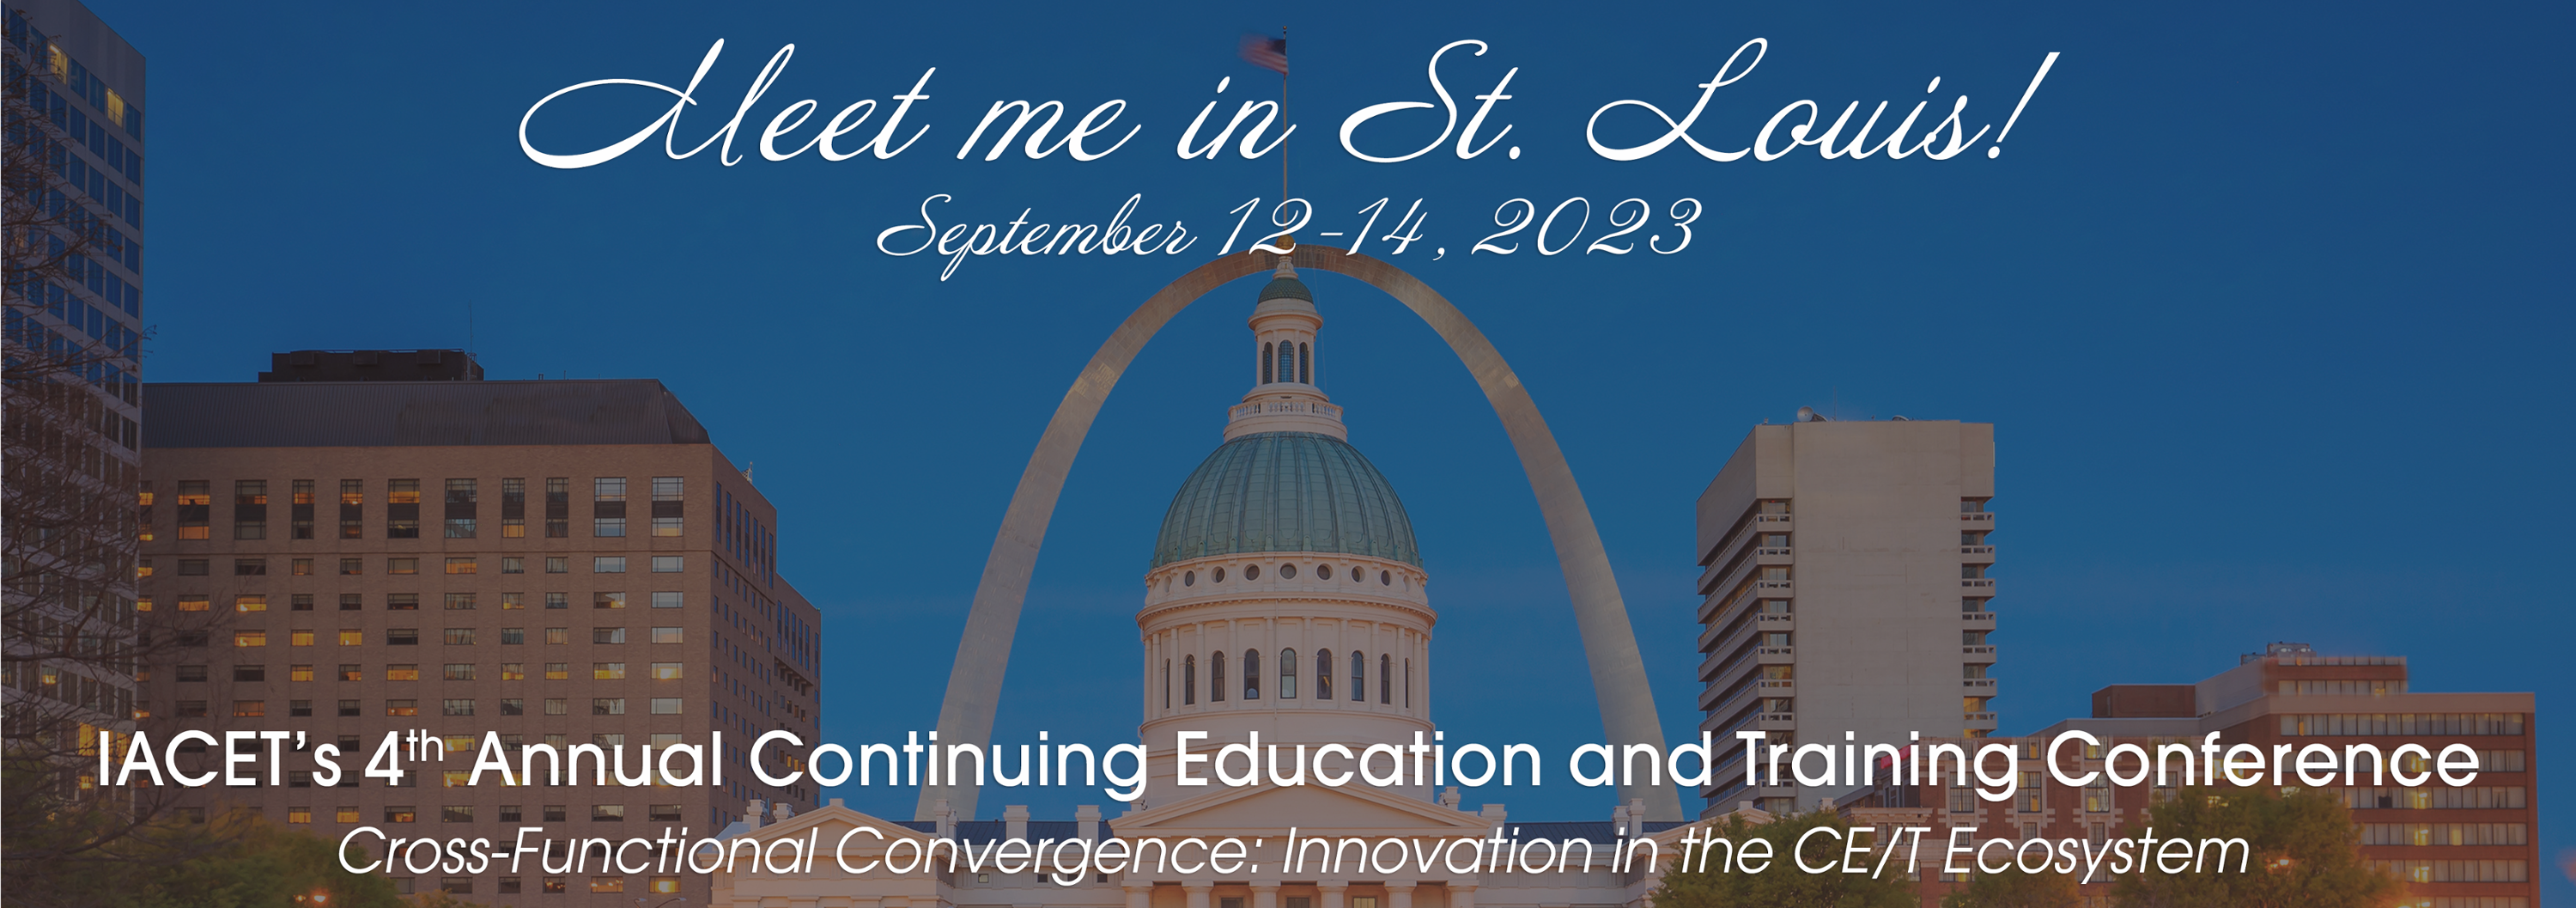 The St. Louis Arch behind the Old Courthouse with the words "Meet me in St. Louis on September 12-14, 2023 for IACET's 4th Annual Continuing Education and Training Conference"